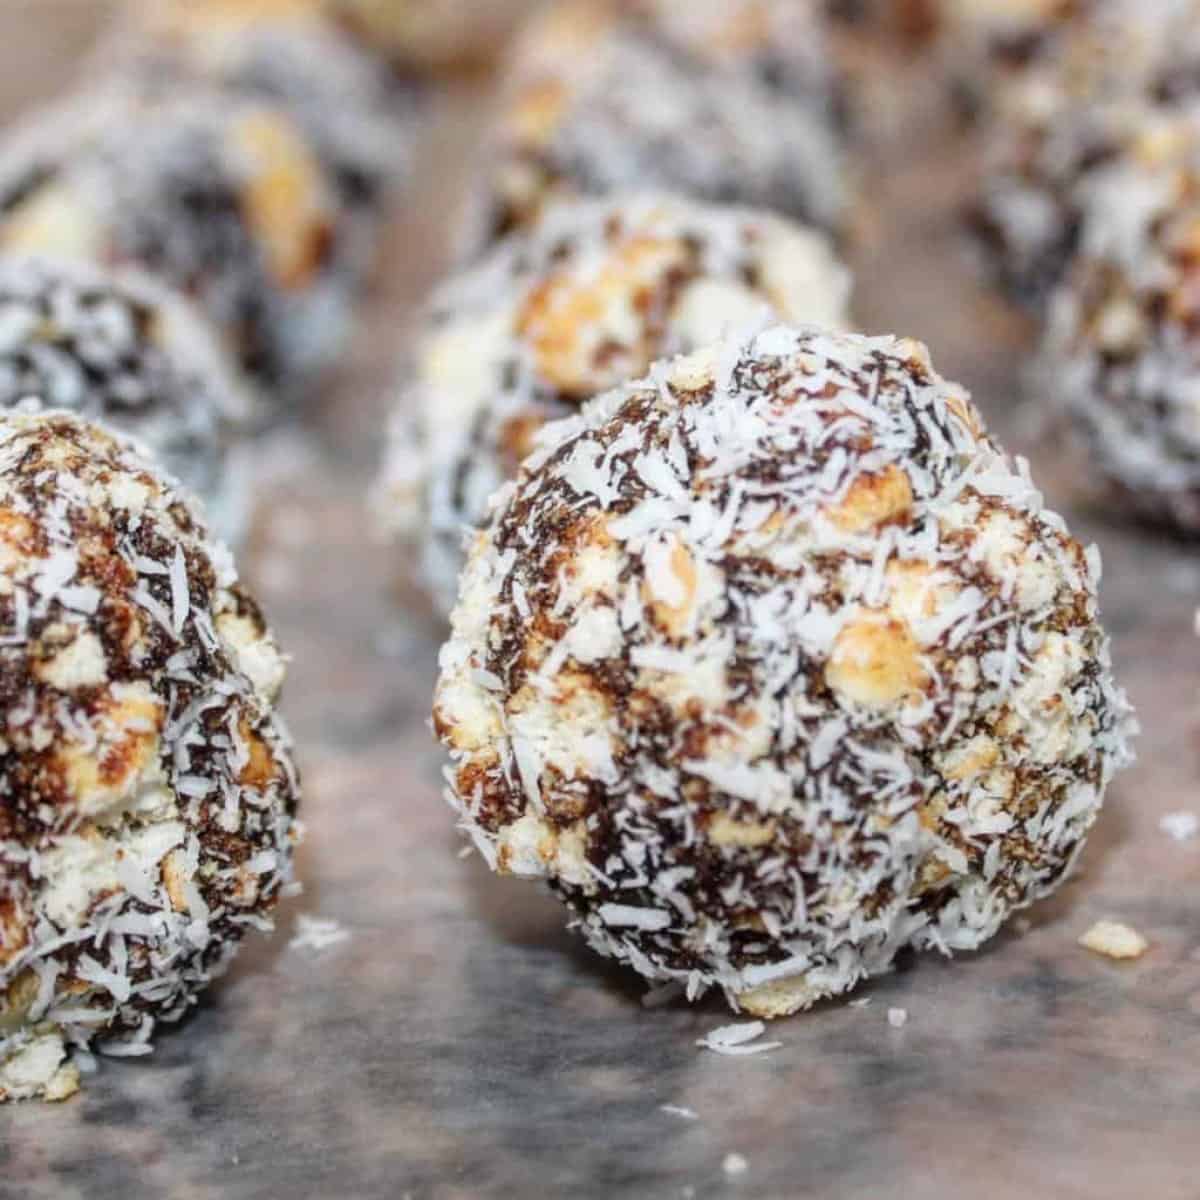 delicious balls made with date paste, walnuts, and covered with coconut flakes